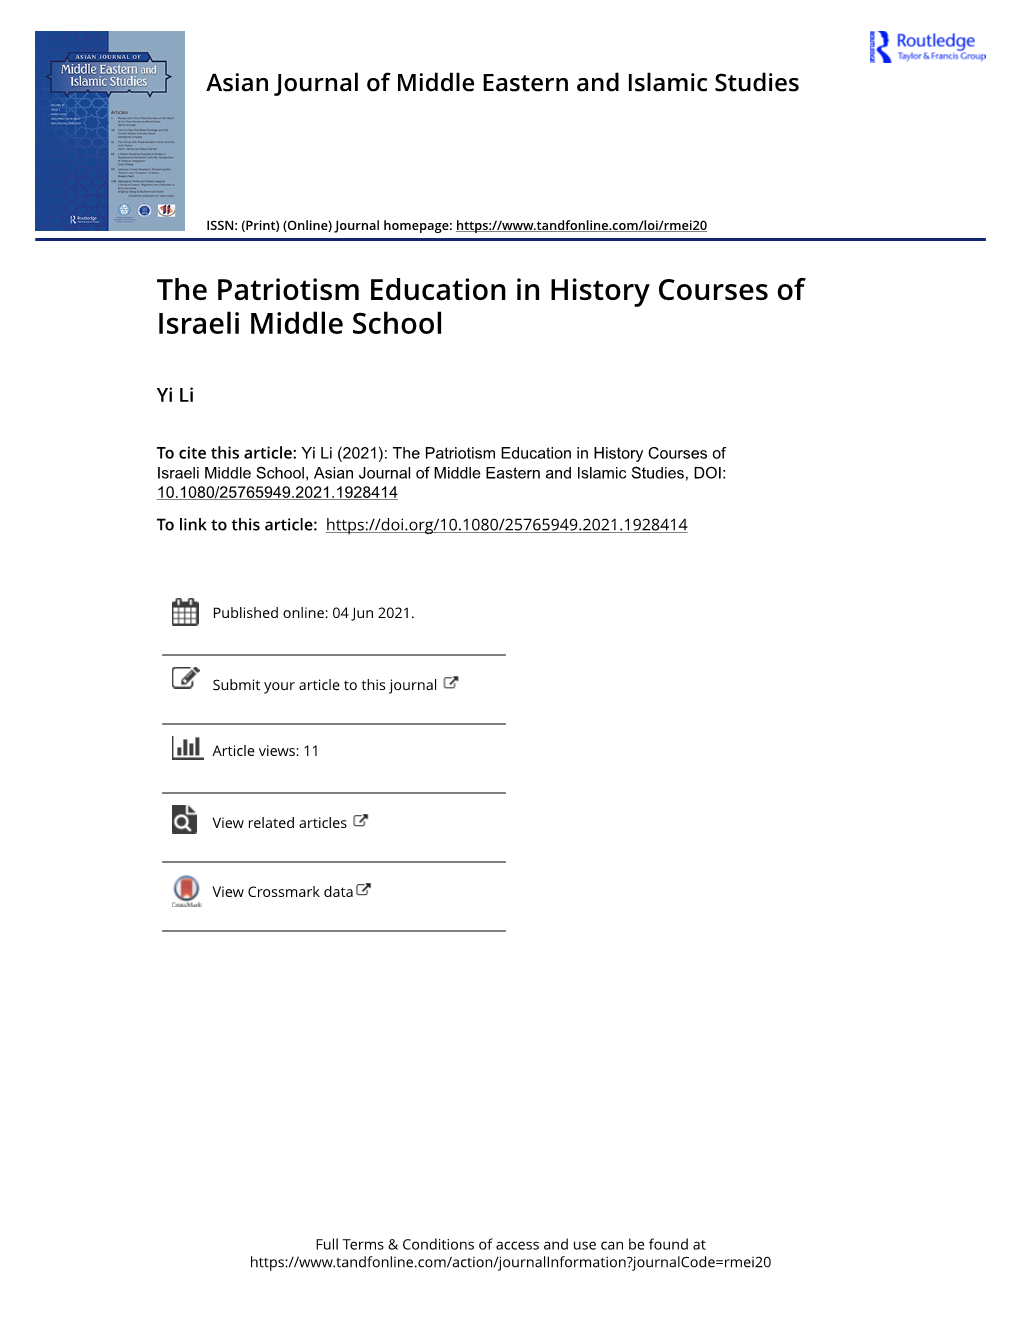 The Patriotism Education in History Courses of Israeli Middle School